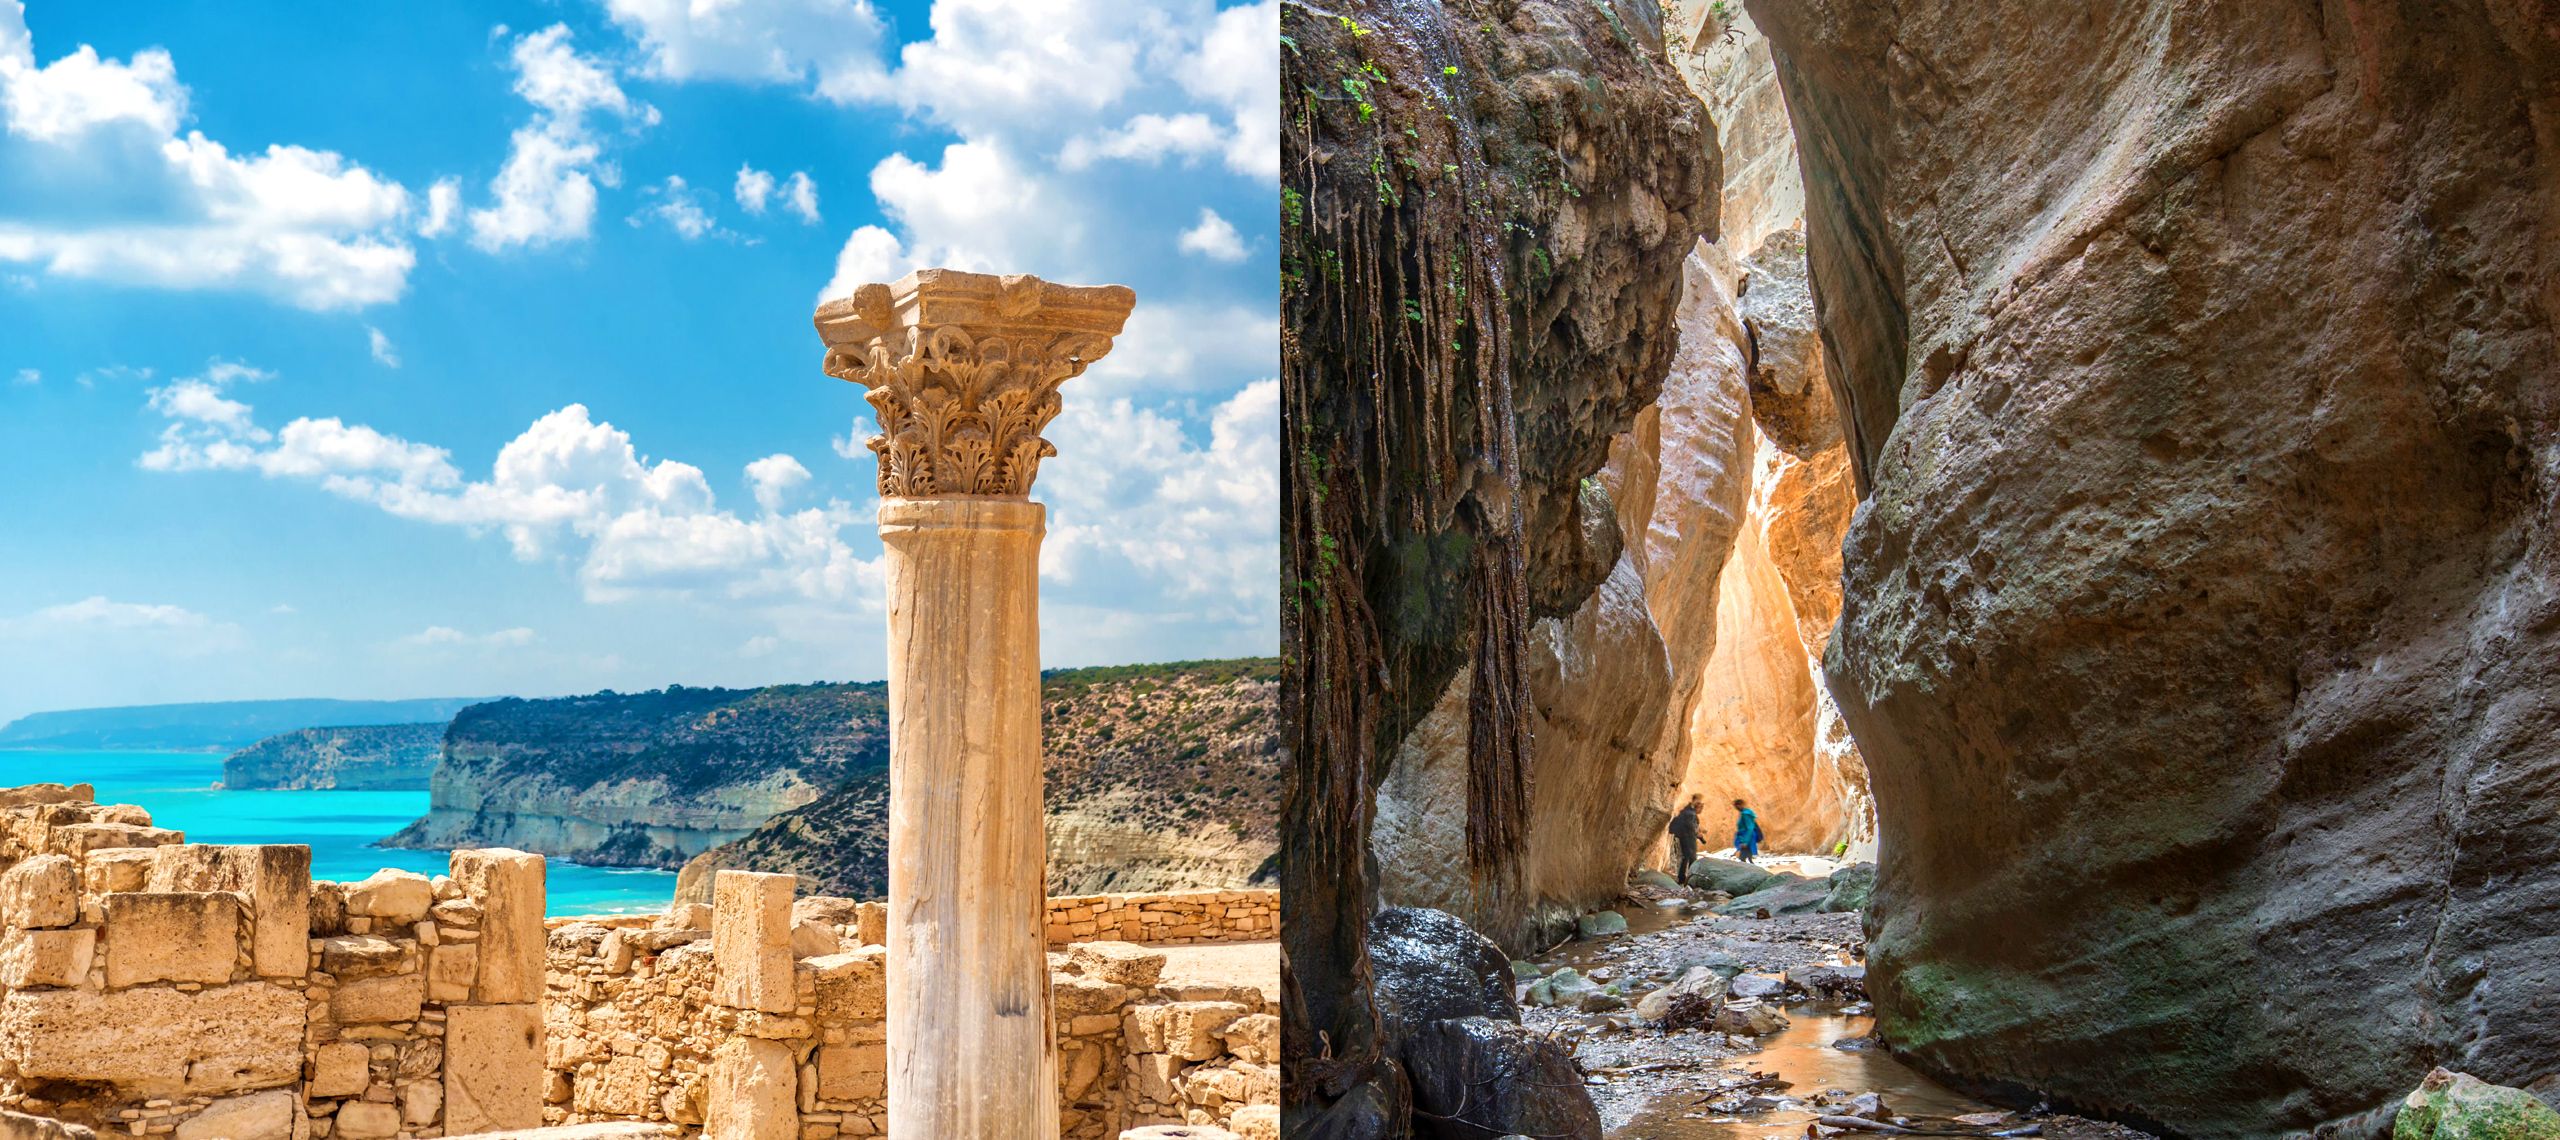 Kourion to West Akamas in Cyprus